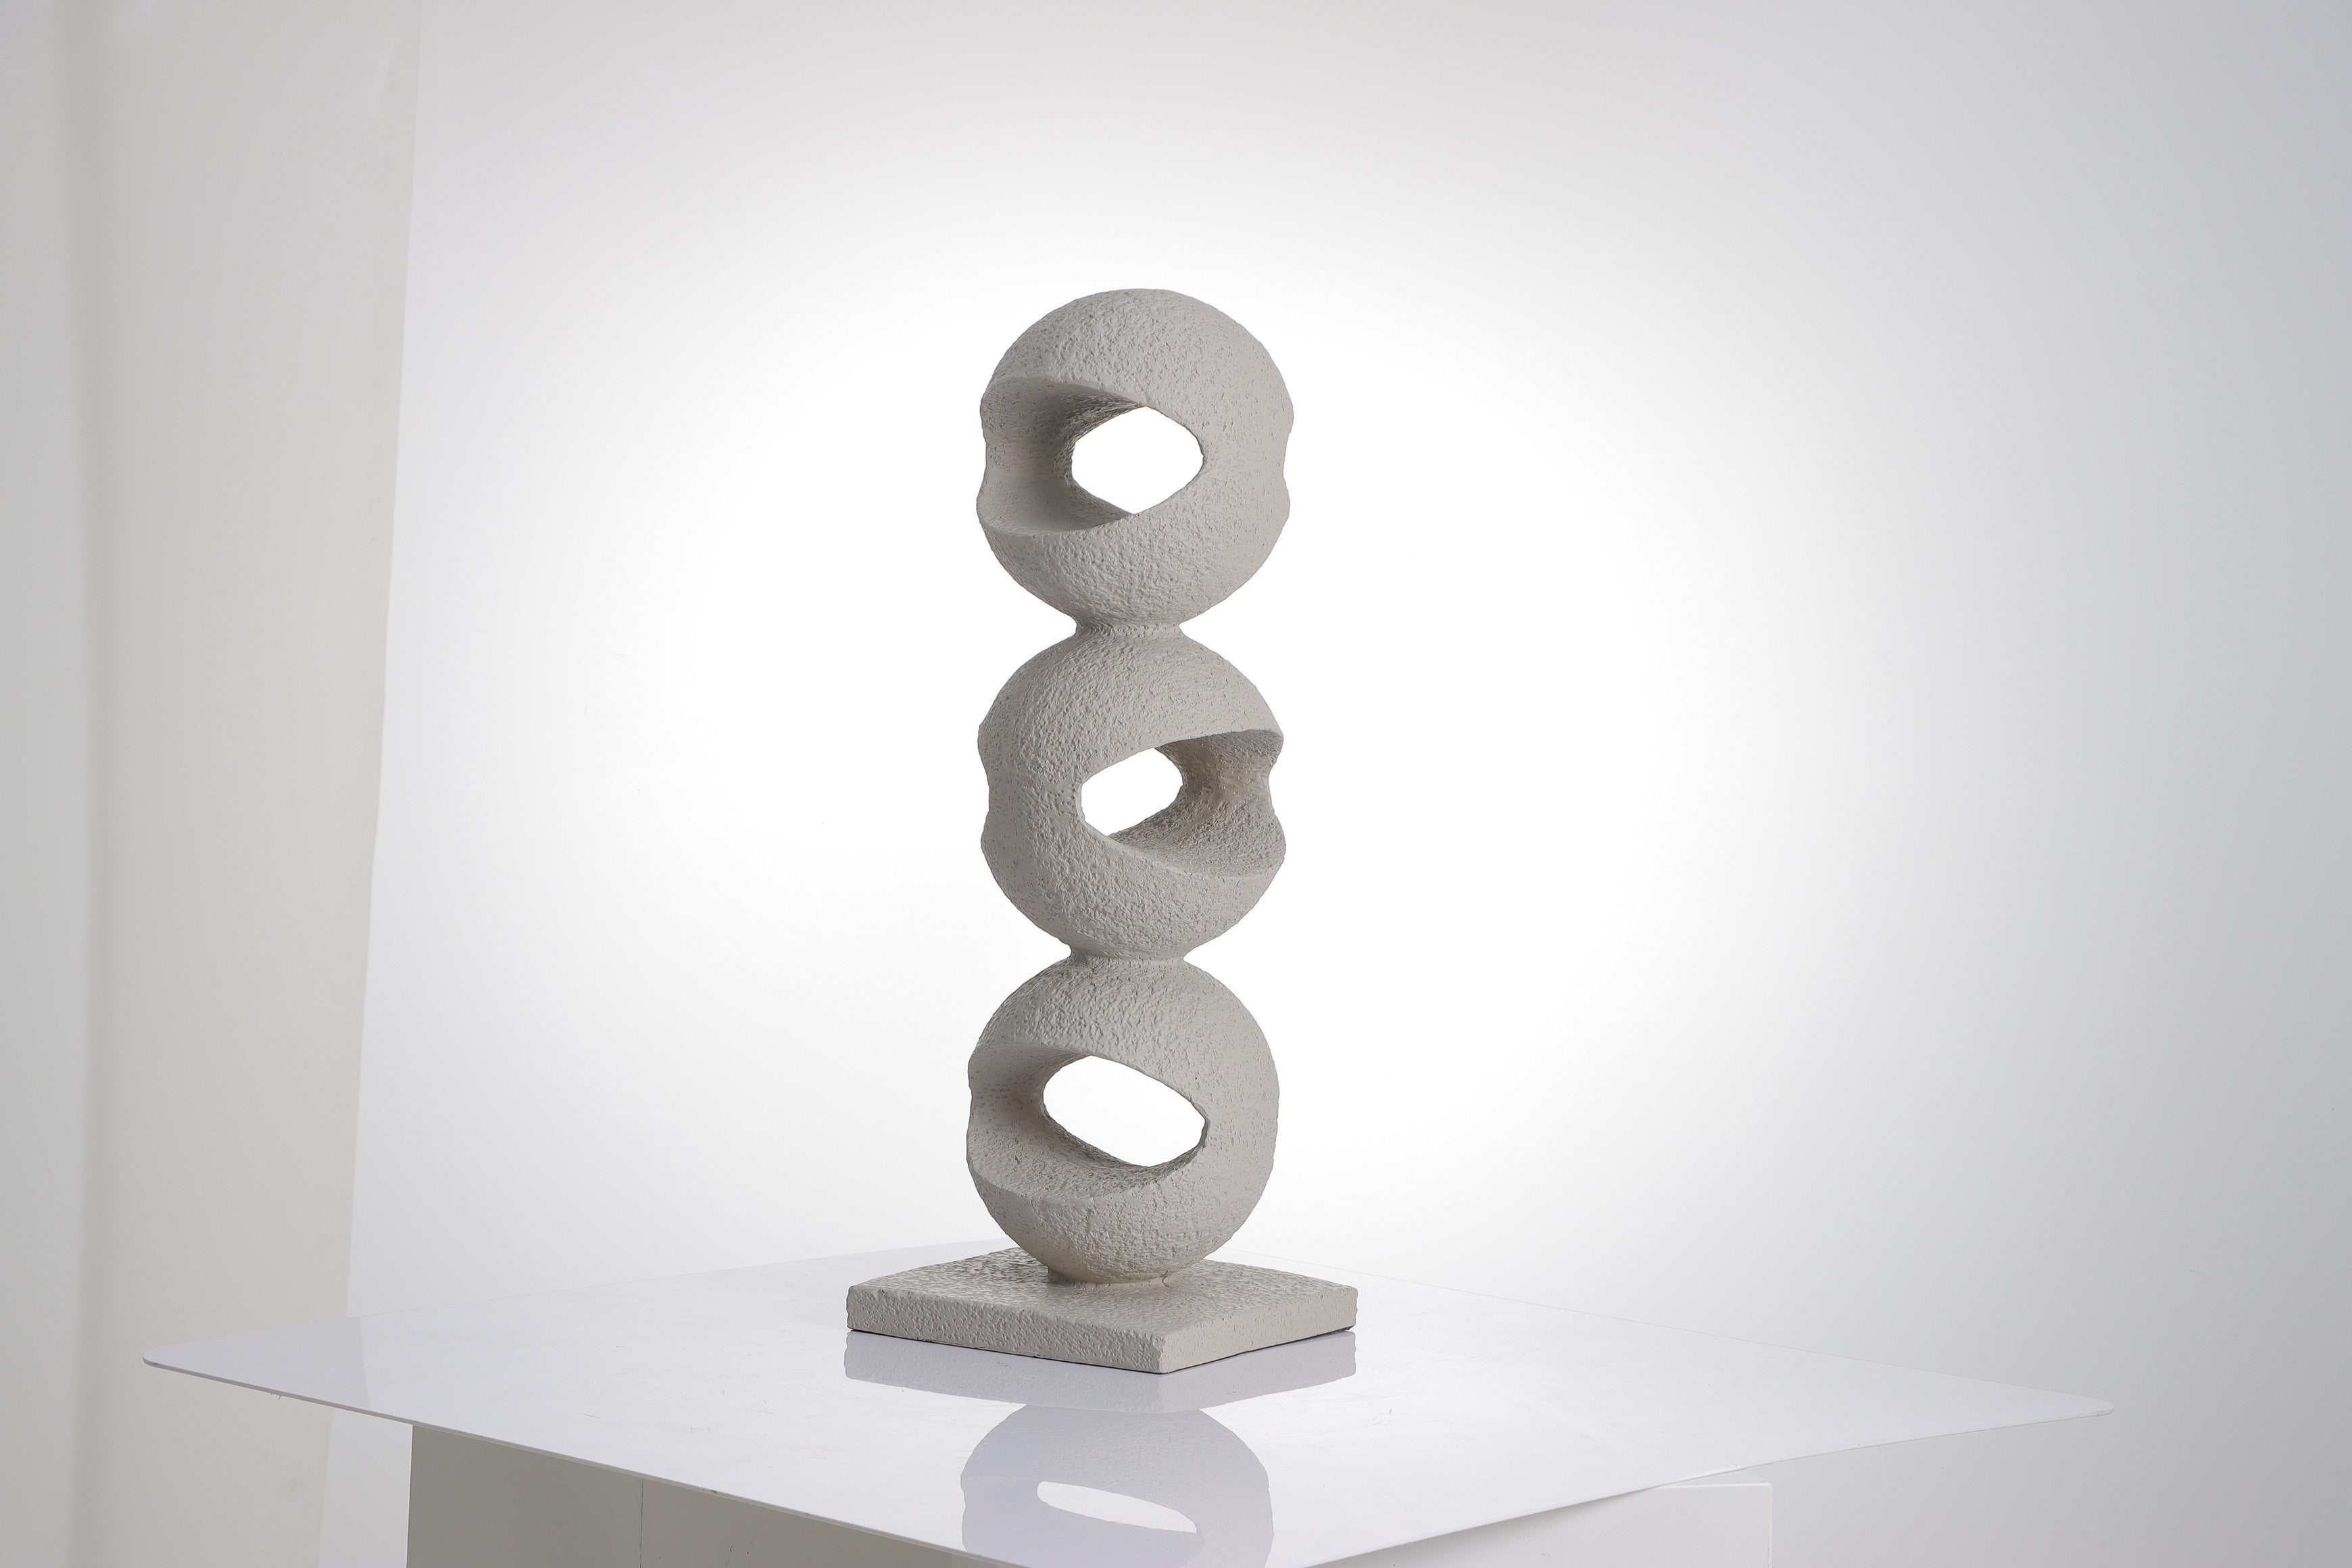 ABSTRACT SCULPTURE